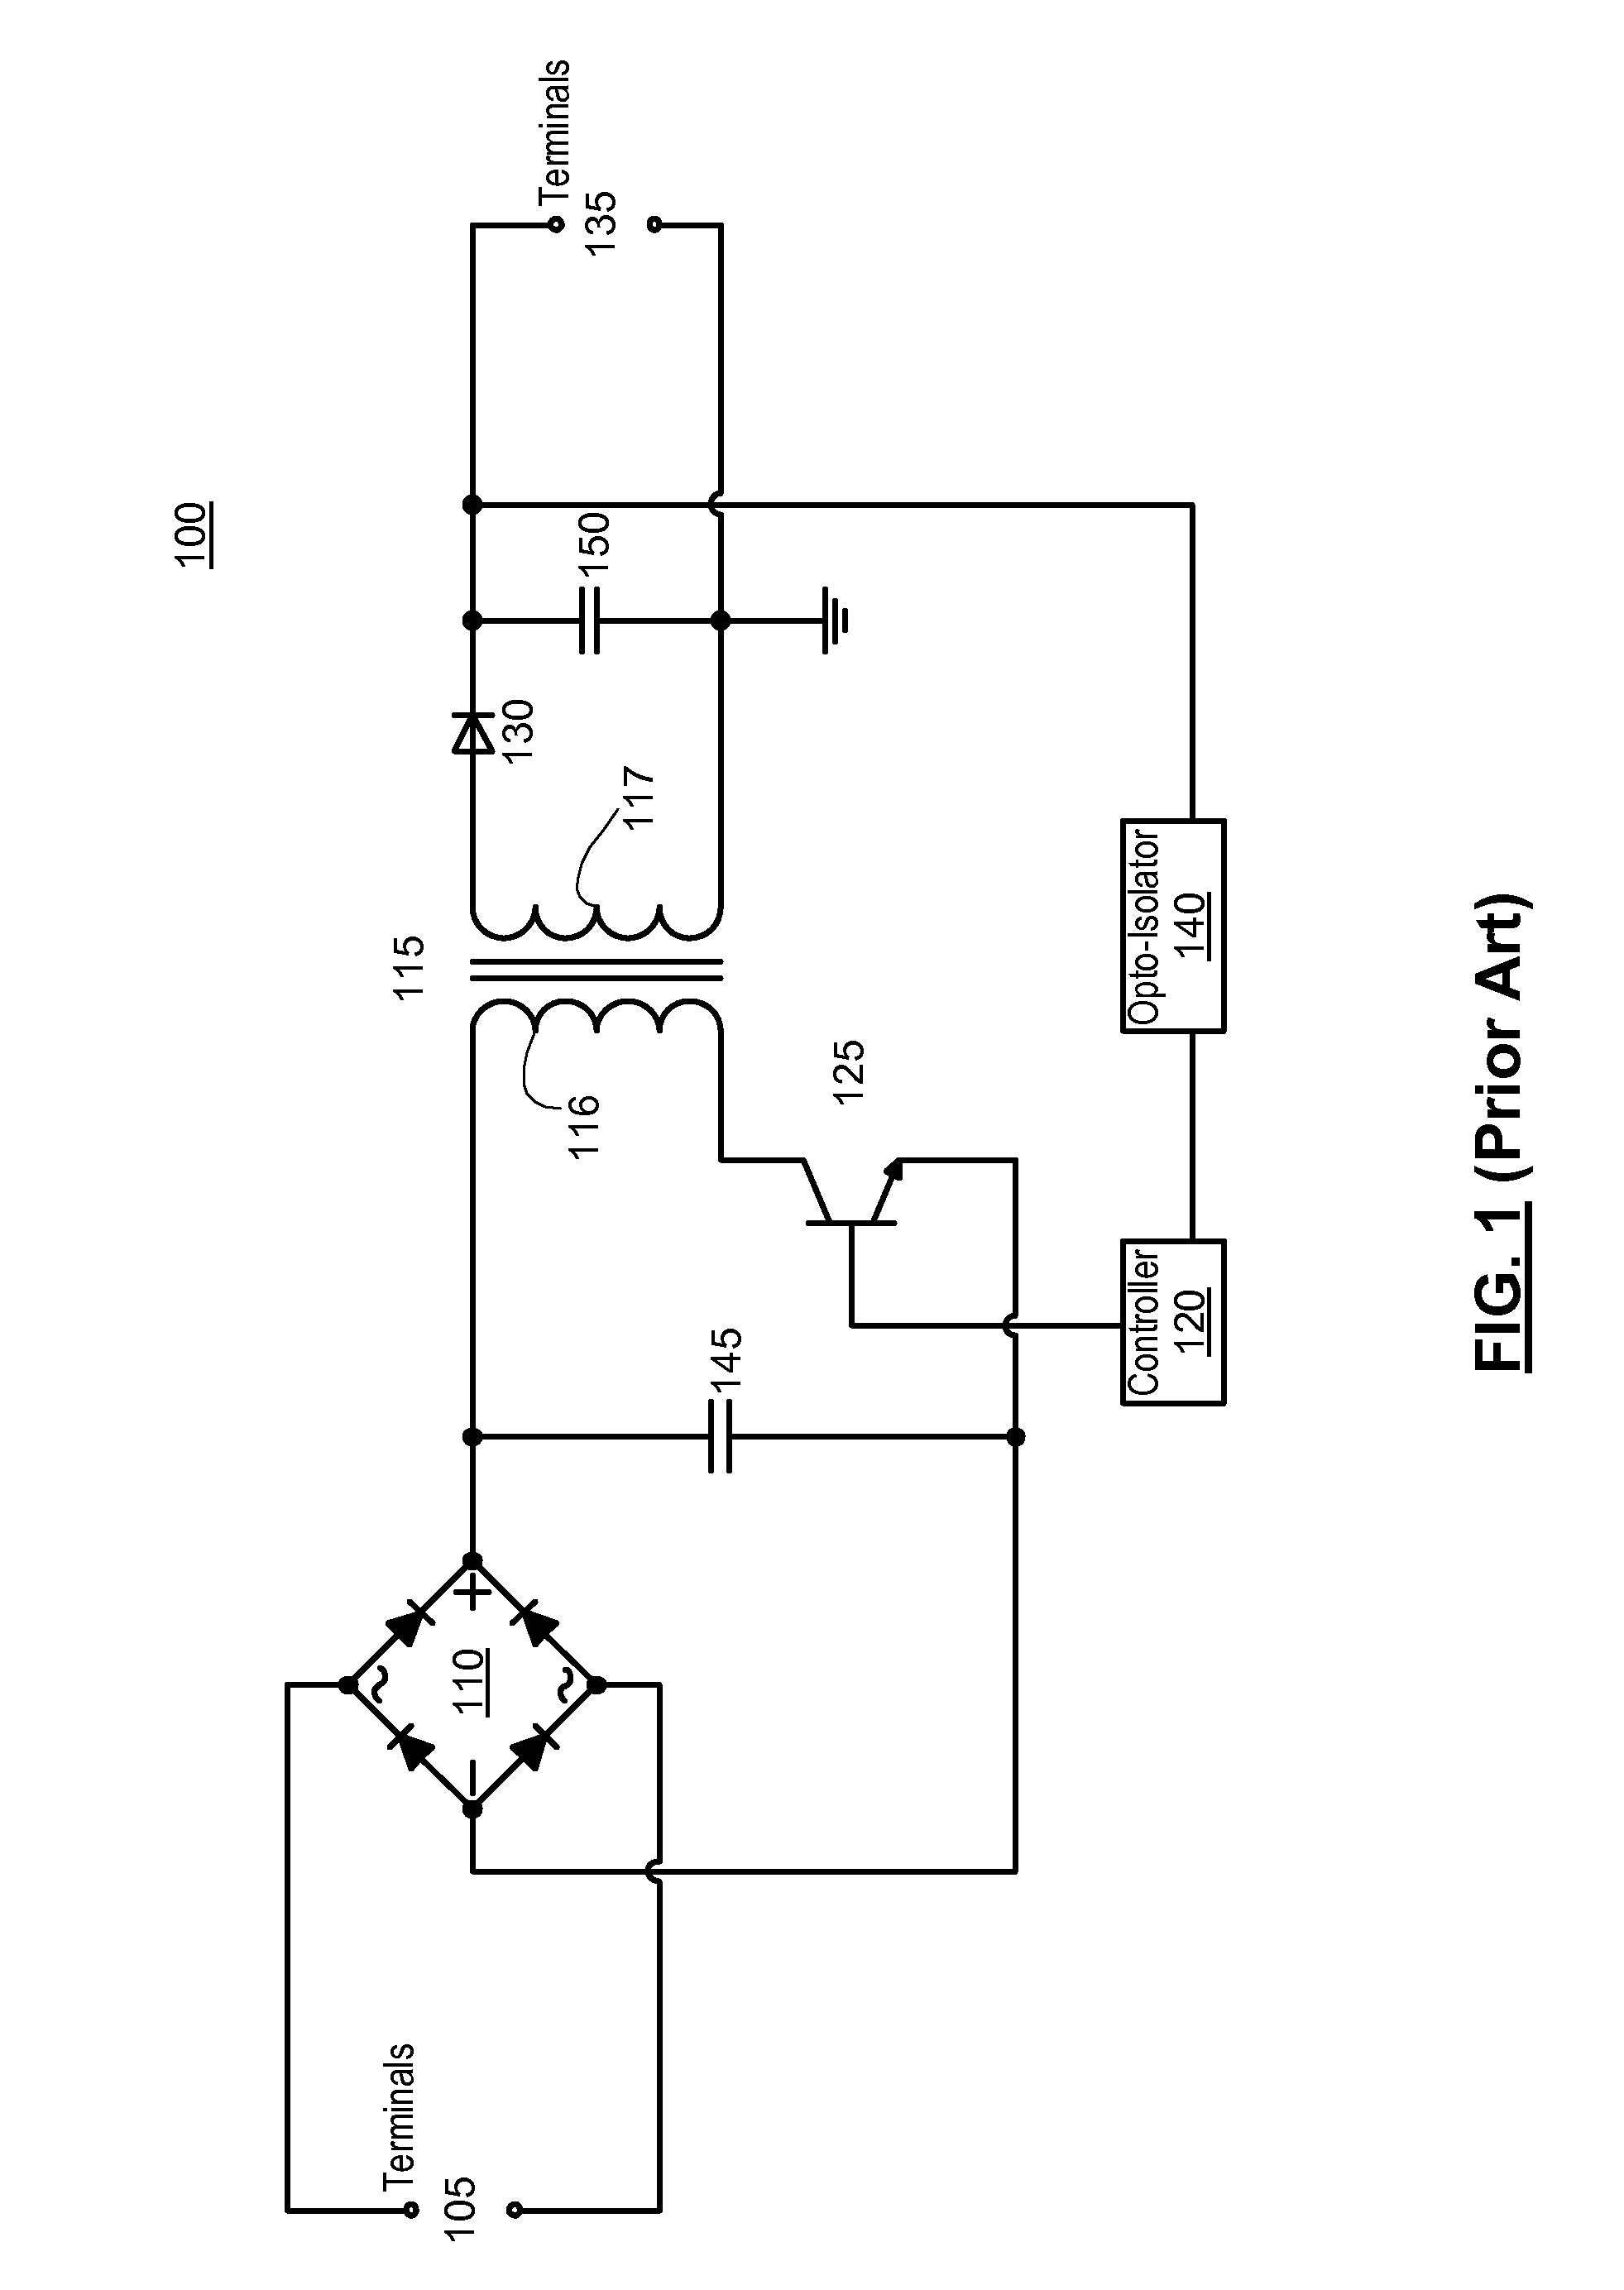 Laptop computer storage and battery charging systems and methods including transient current inrush limiter